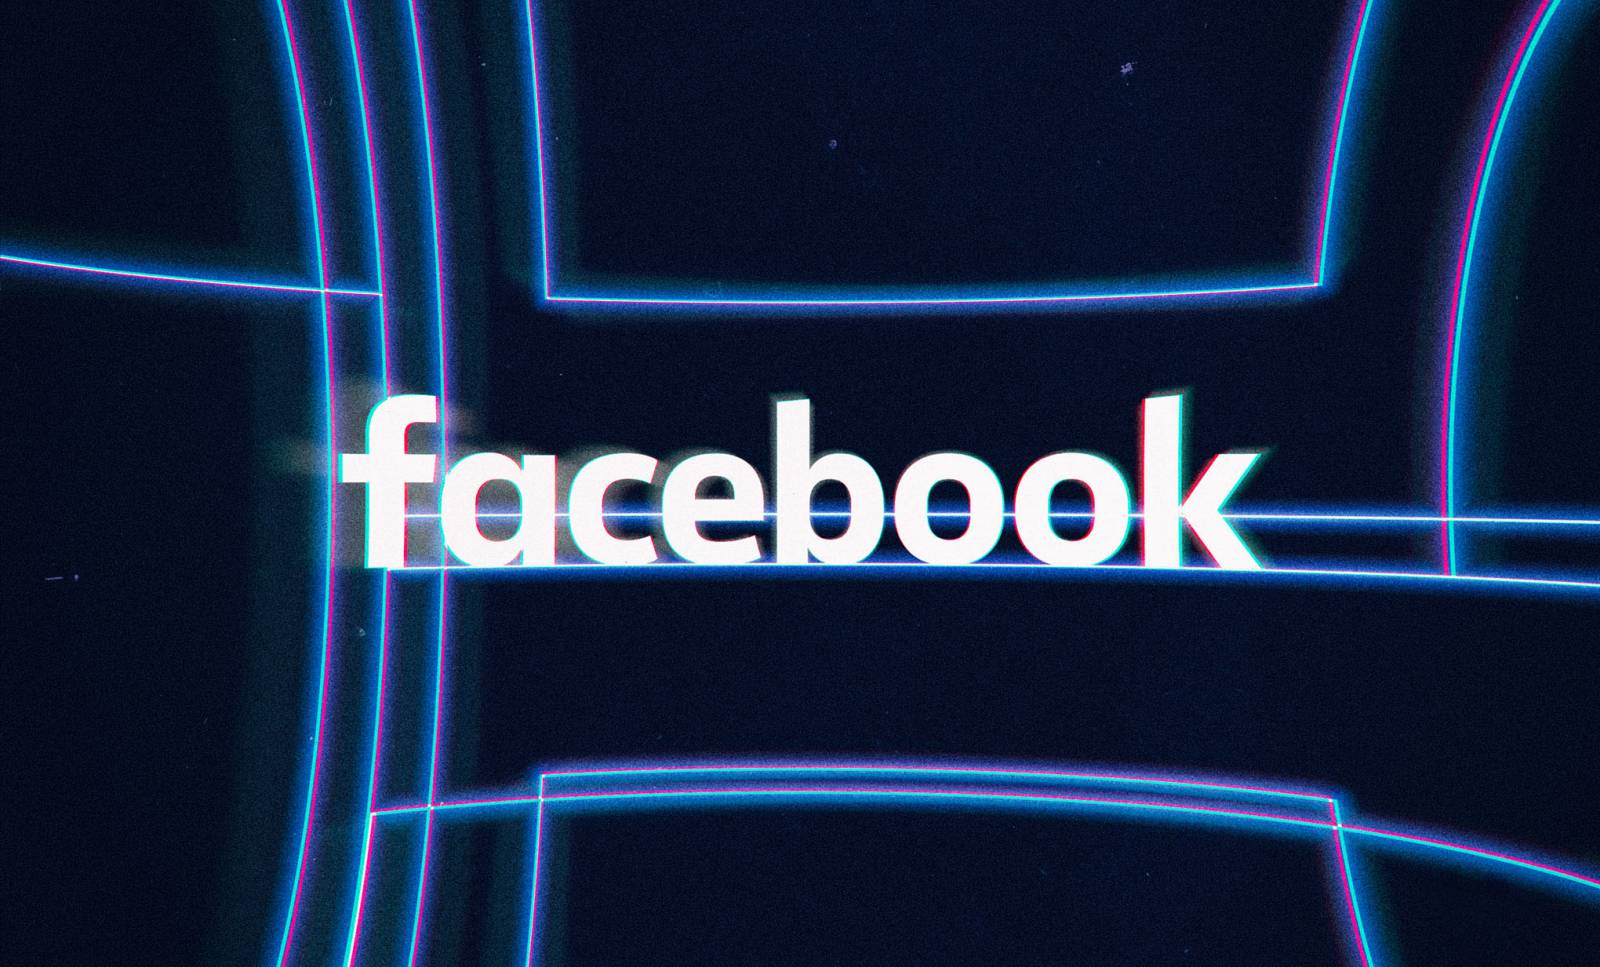 Facebook will HIDE LIKES for People's Posts